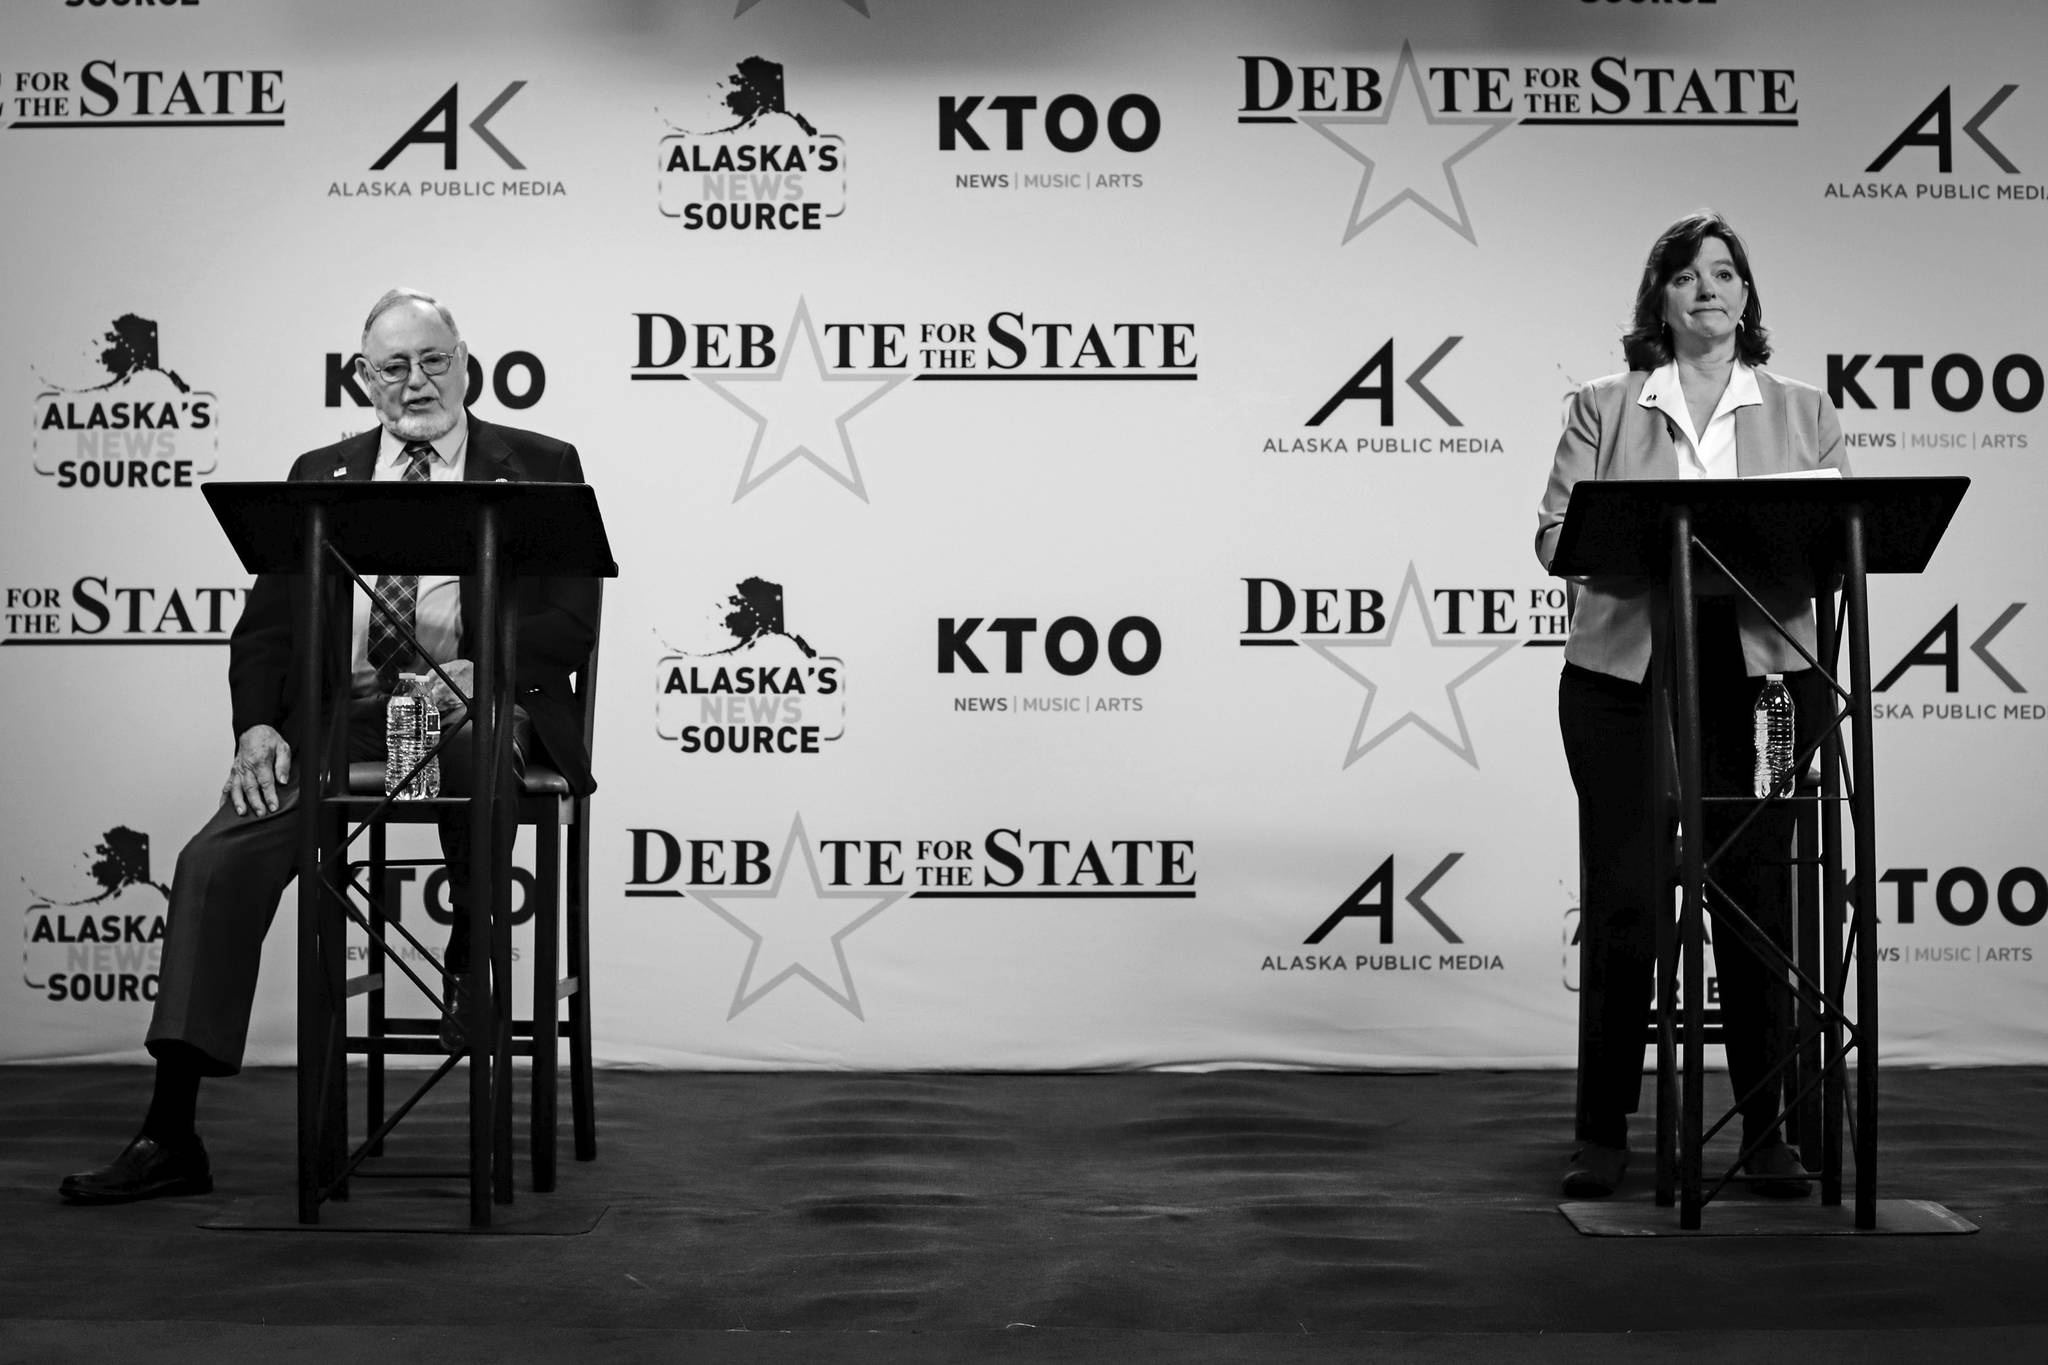 photo by Jeff Chen / Pool PhotoU.S. Rep. Don Young, left, and Alyse Galvin square off in a debate for the sole Alaska house seat Thursday, Oct. 22, in Anchorage. The debate between the candidates for Alaska’s sole seat in Congress became contentious Thursday, with challenger Galvin saying she’s tired of Young misrepresenting her position on issues.